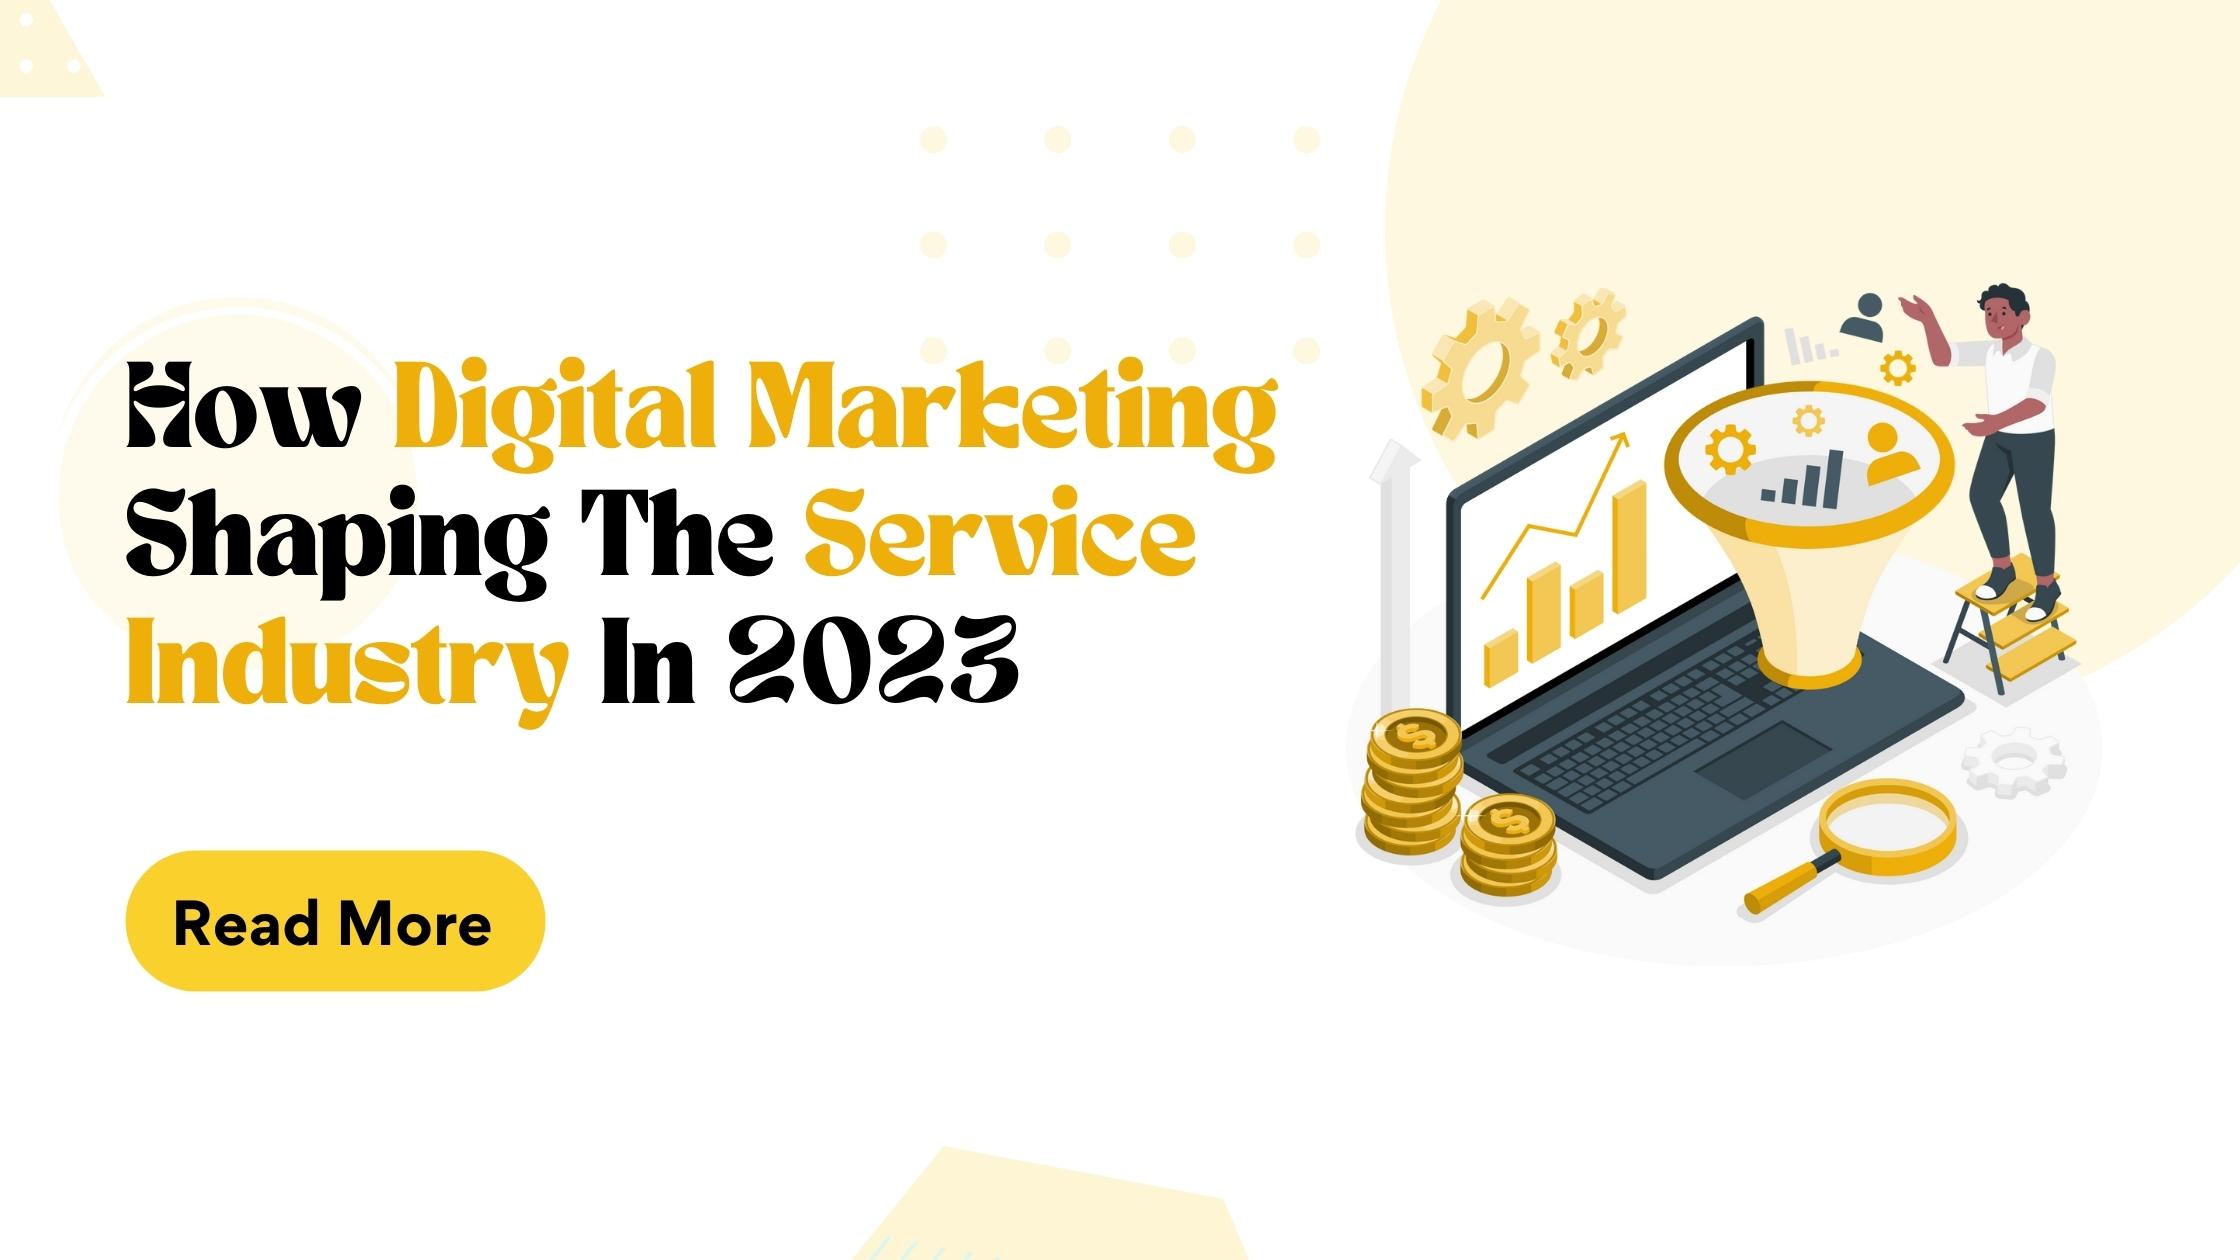 How Digital Marketing is Shaping the Service Industry in 2023